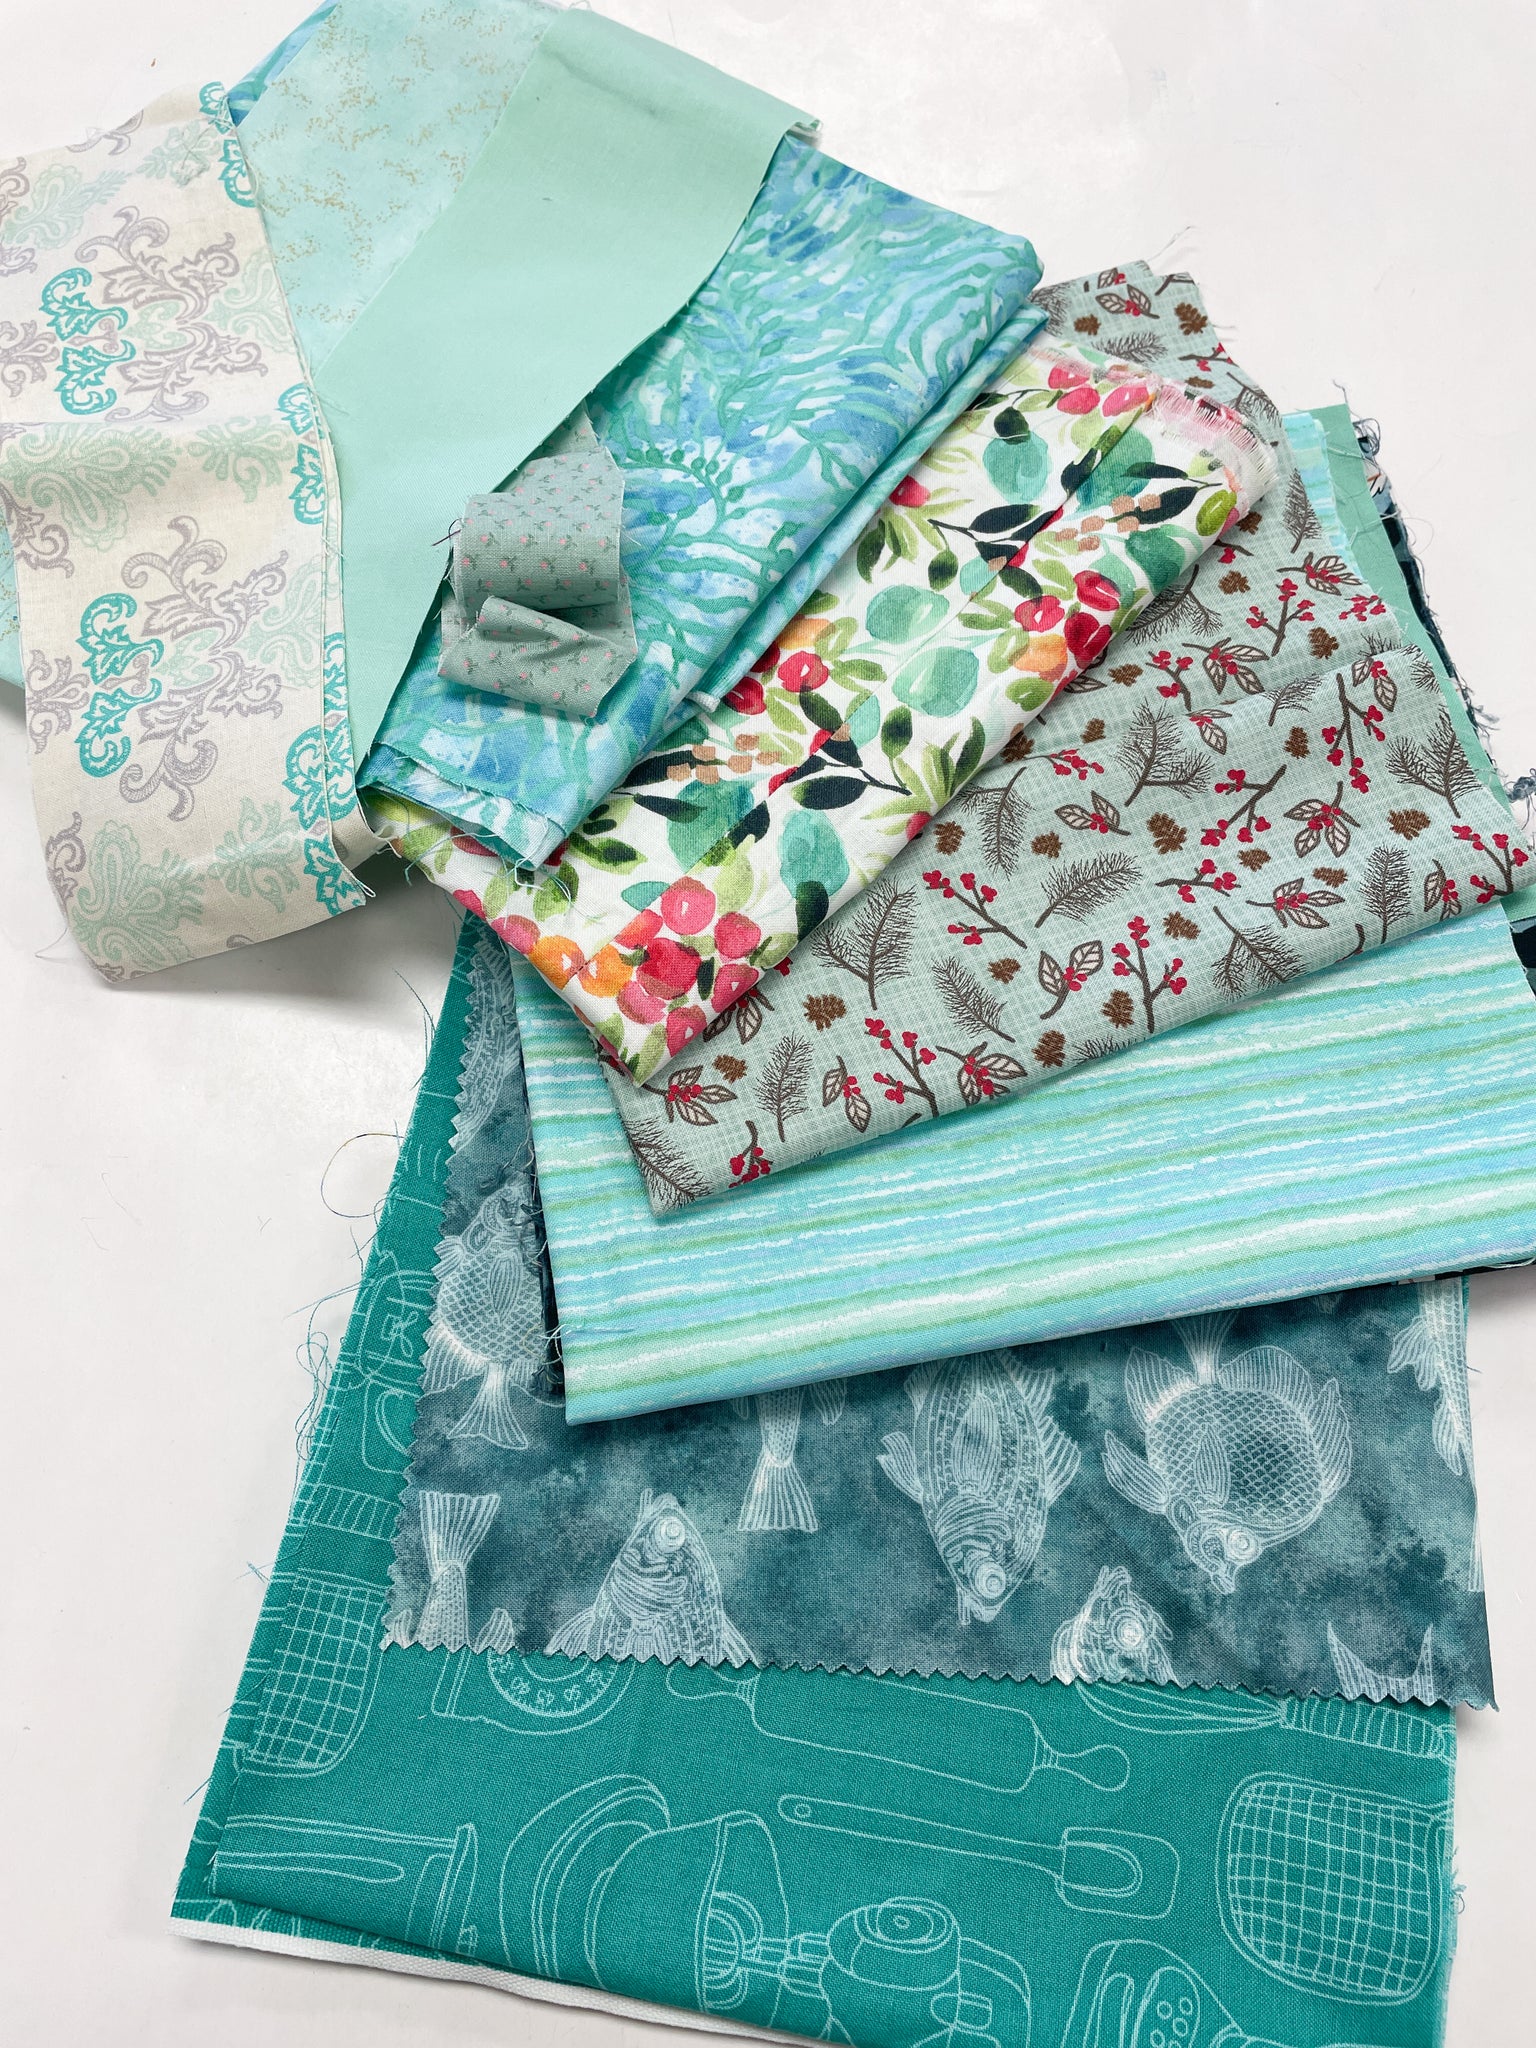 Quilting Cotton Mystery Scrap Remnant Bundle - Aquas 1 POUND – Lucky DeLuxe  Fabrics